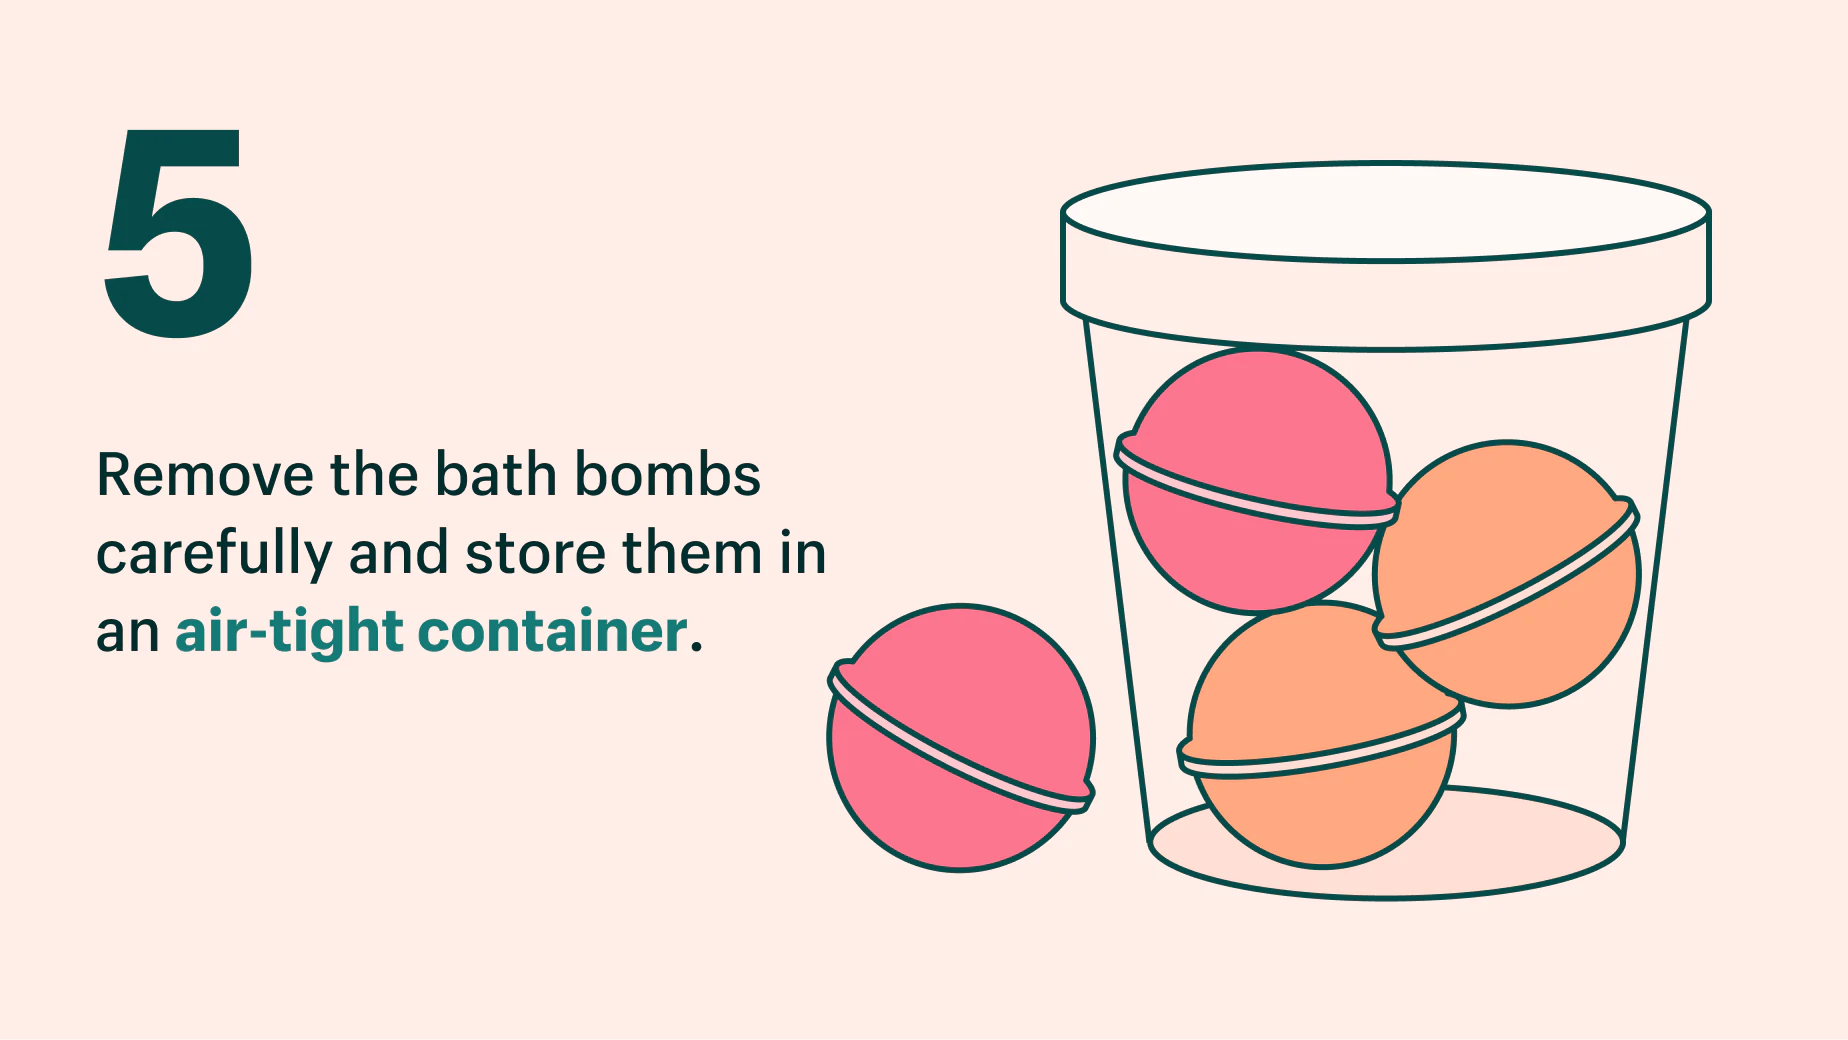 Step 5 to making bath bombs at home: store in airtight container